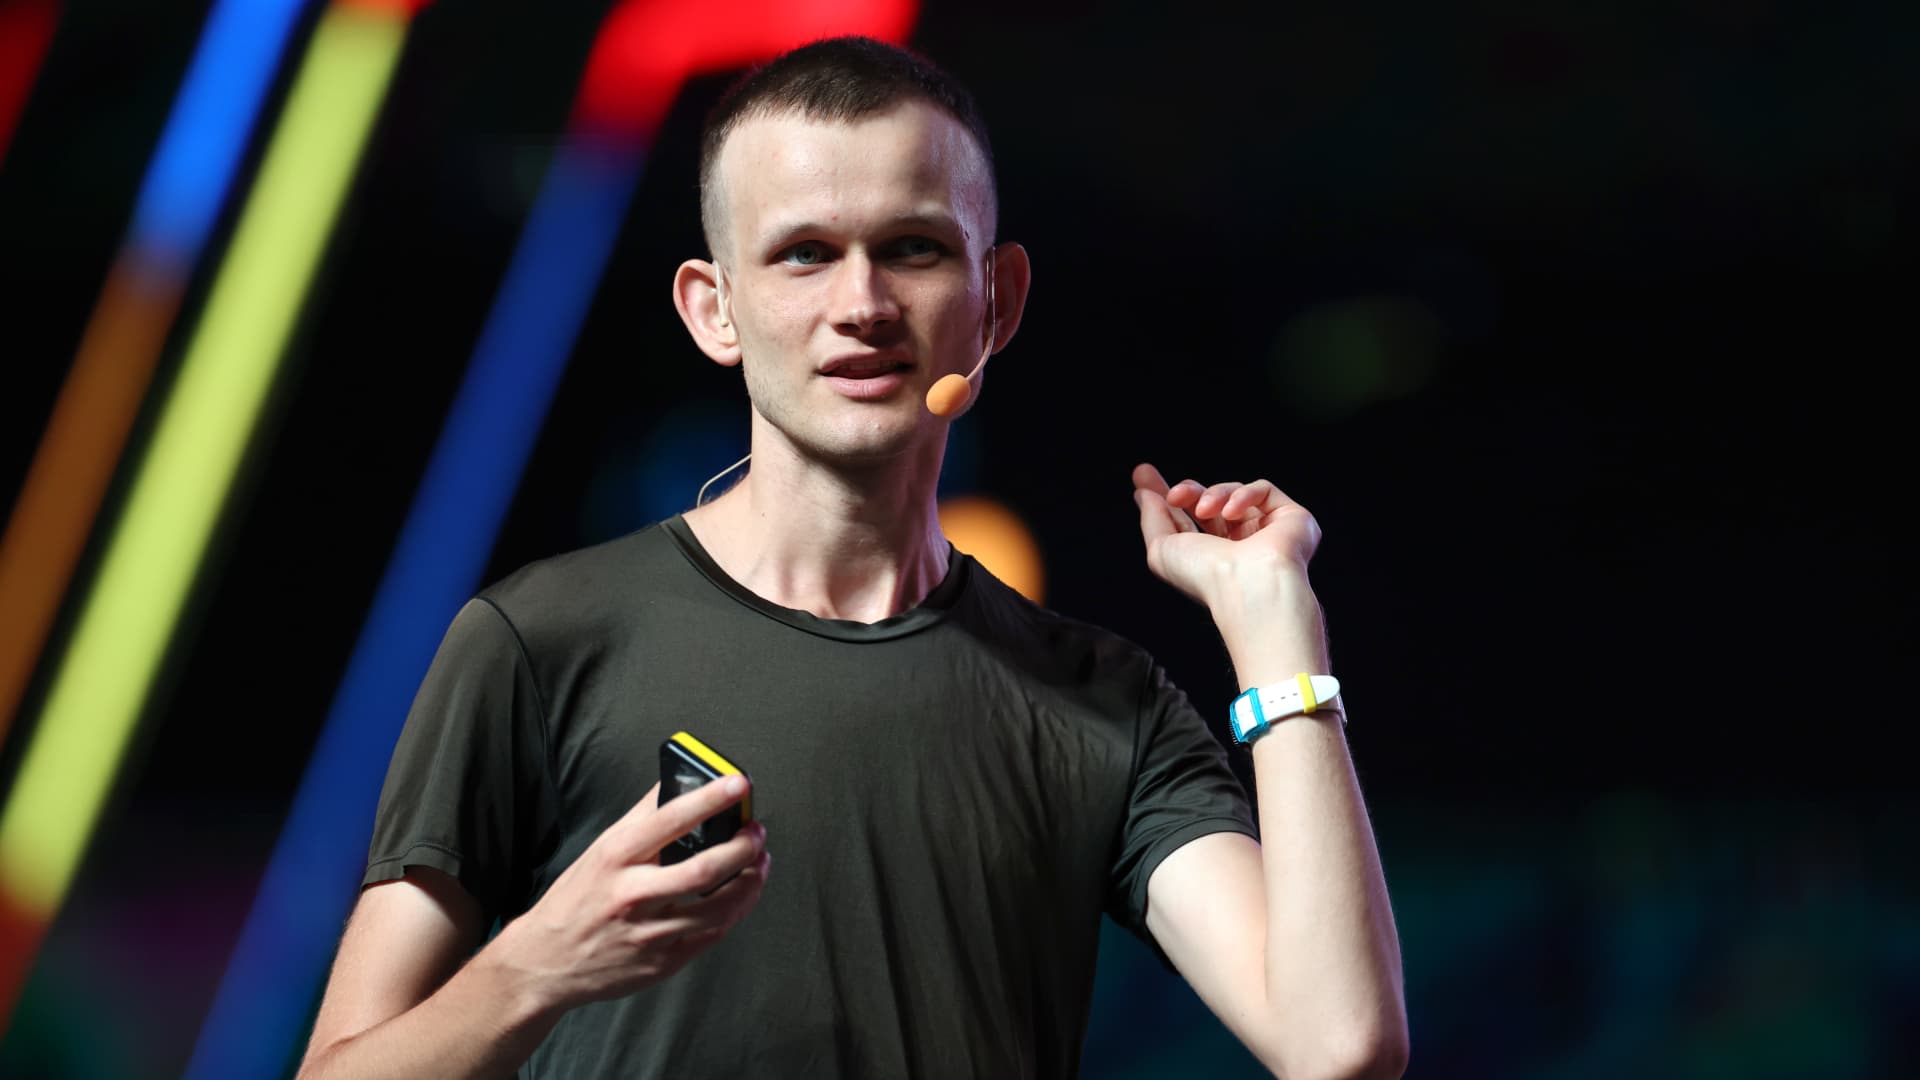 Ethereum founder Vitalik Buterin travels the globe to keep crypto alive as the U.S. cracks down